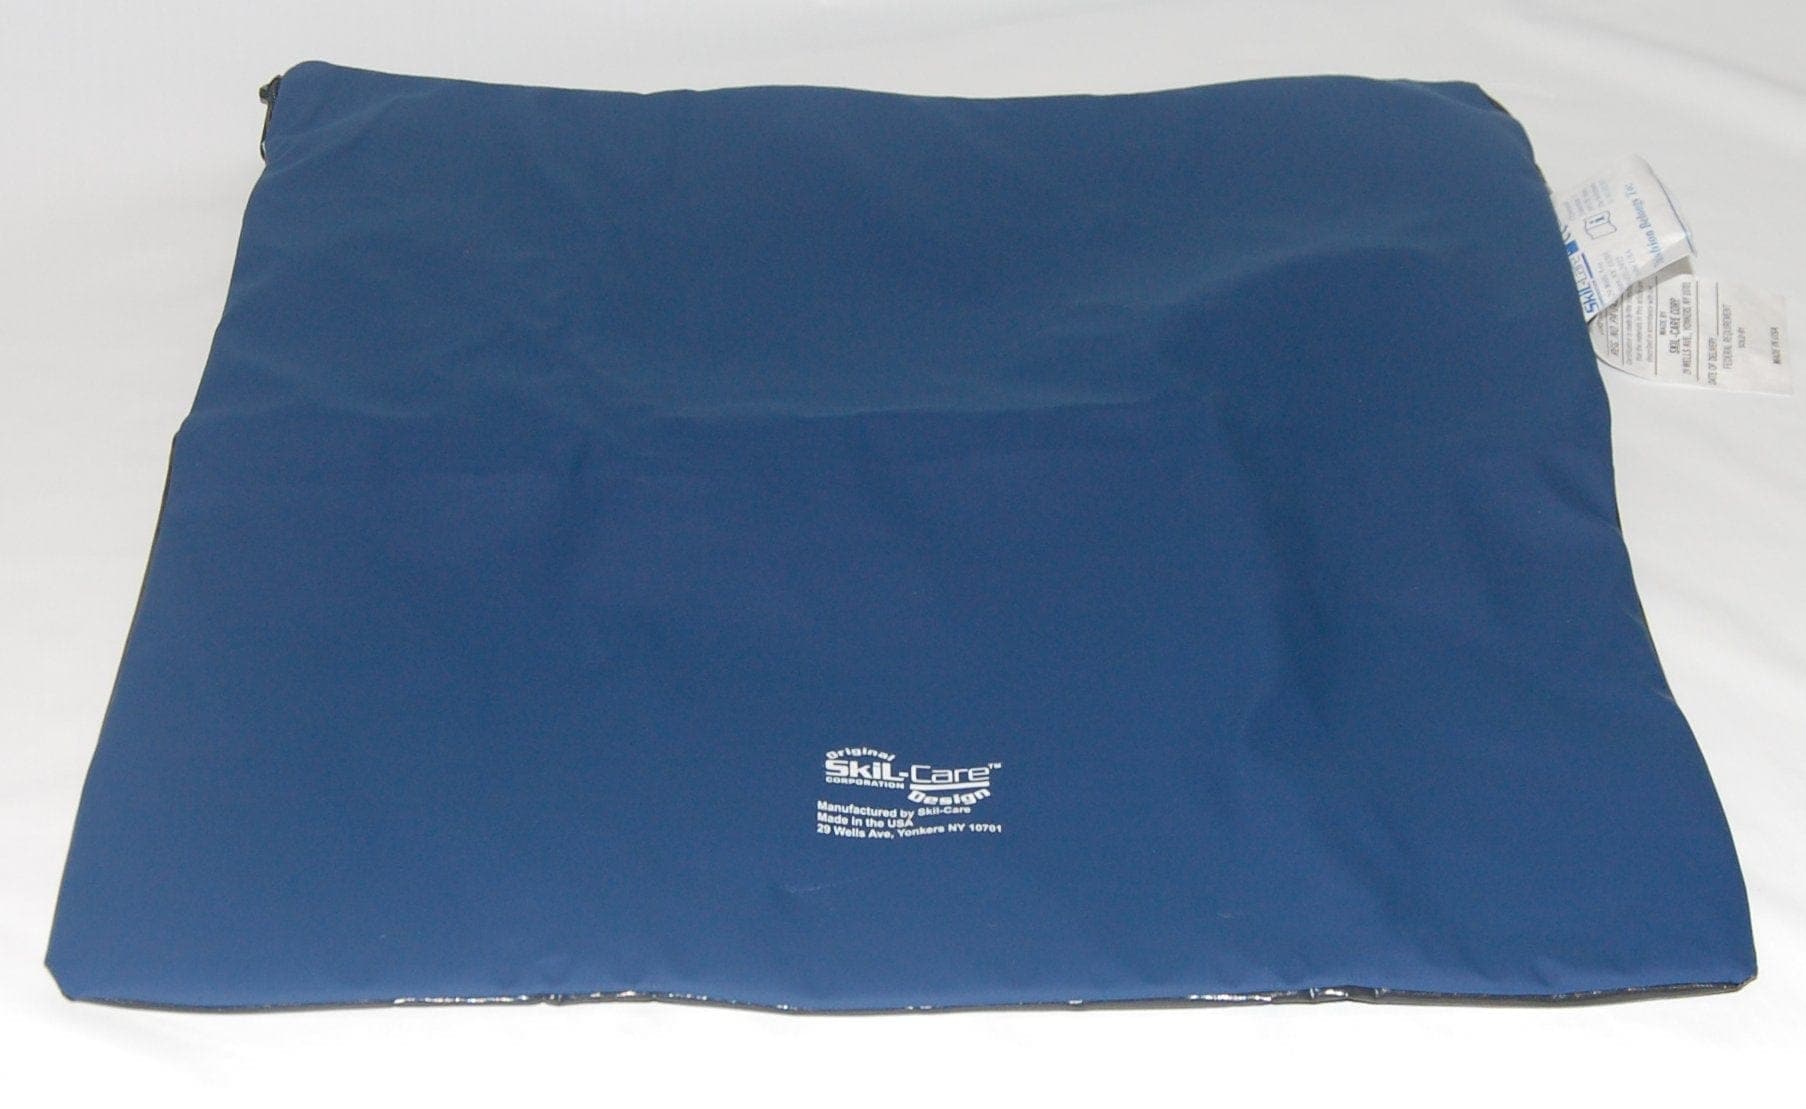 SkilCare Cushions SkilCare Cover, LSII for 914430 x-Gel Overlay, 18"